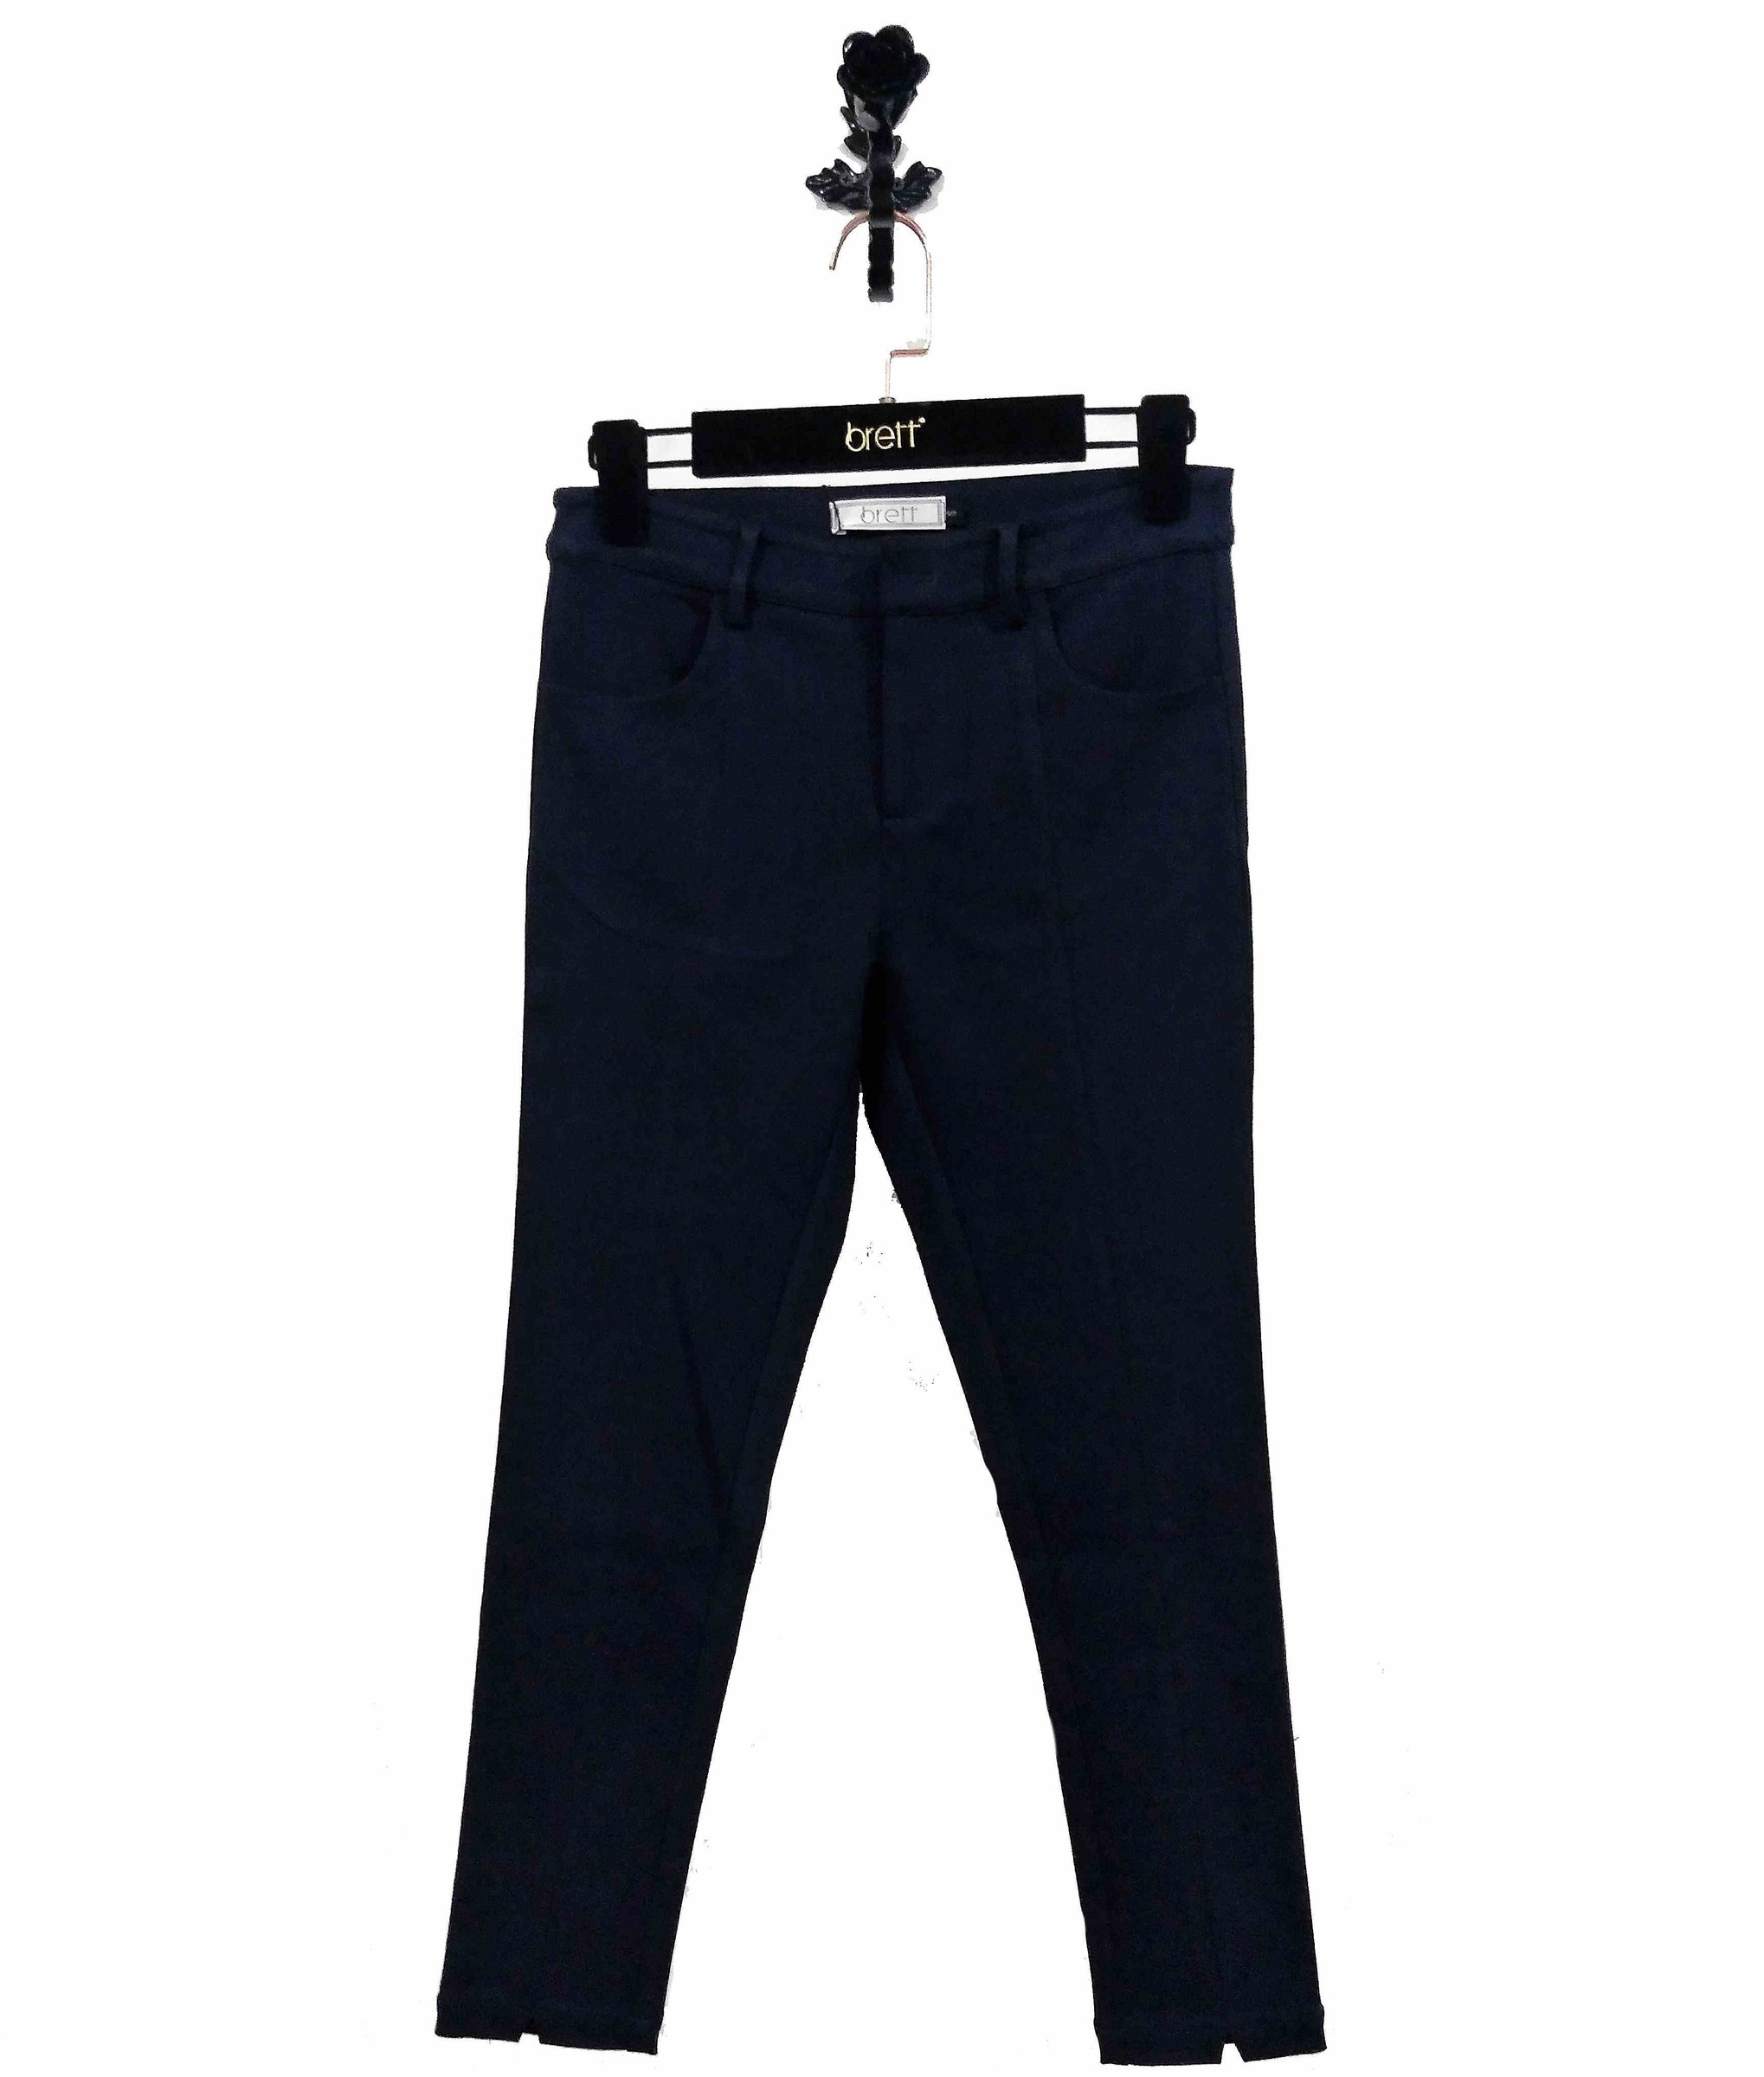 Pencil pants fashion design with navy jeans for high pants jeans without decoration ODM OEM service (1).jpg